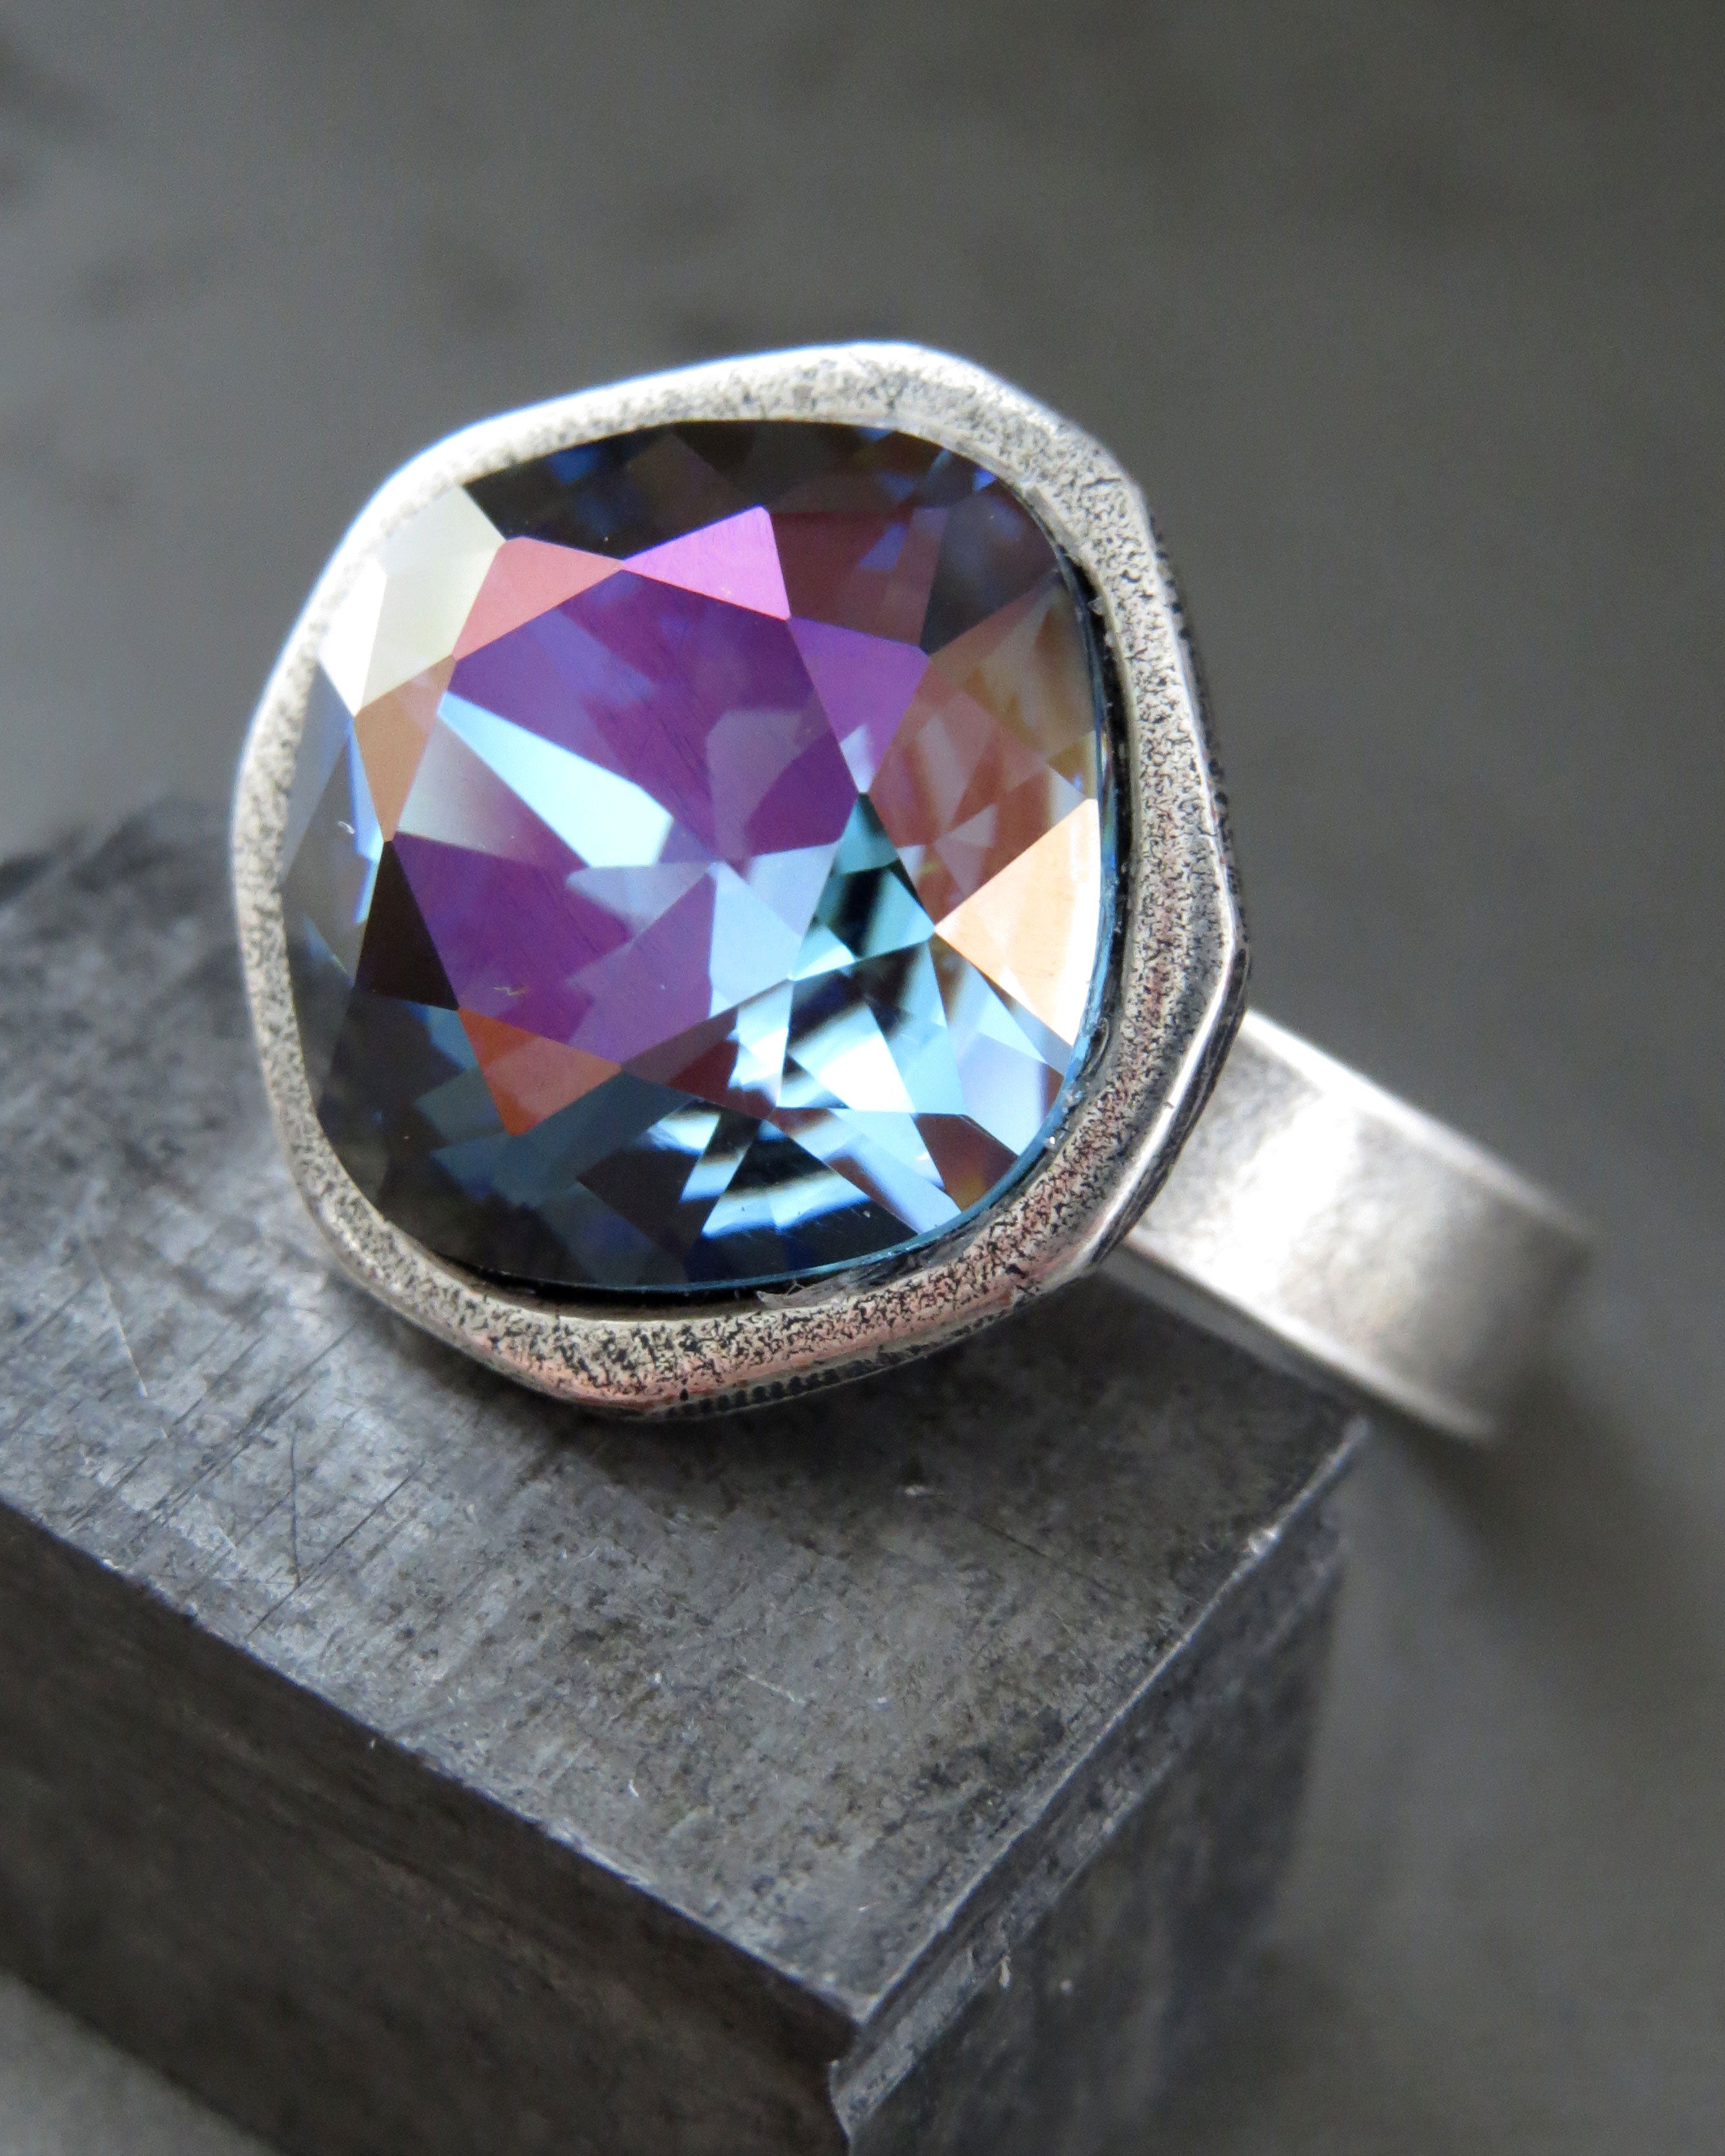 OUT of the DEPTHS - Crystal Ring in Aqua & Dark Blue